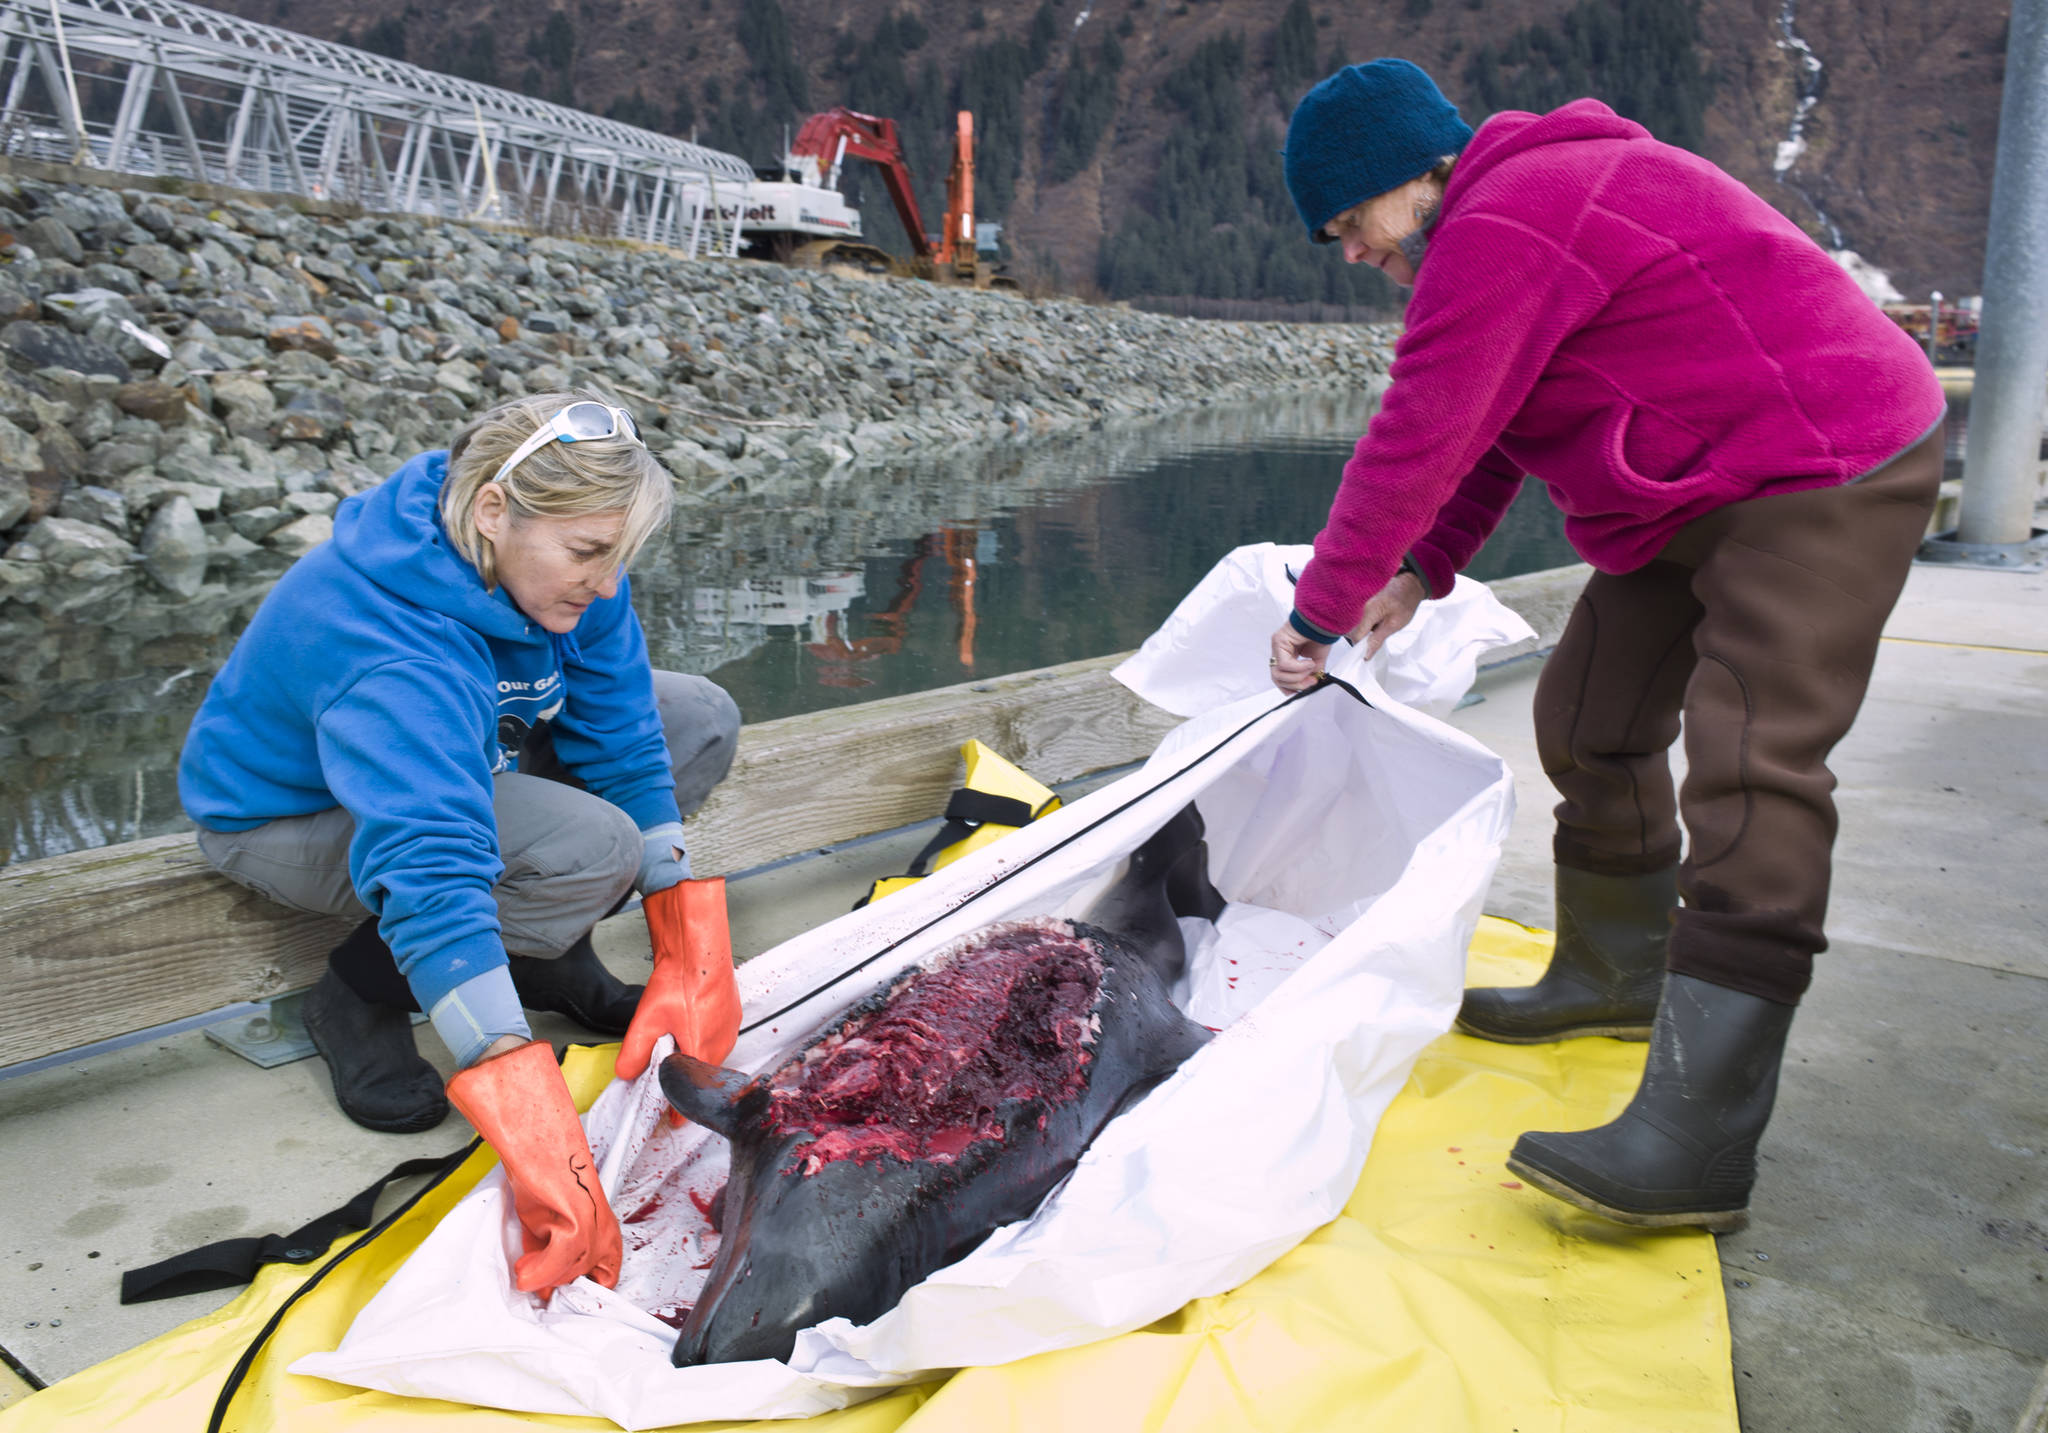 In this file photo, marine biologist Michelle Ridgway, left, and NOAA veterinarian and biologist Kate Savage examine a adult female Dall’s Porpoise at the Douglas Harbor on Tuesday, Feb. 23, 2016. The porpoise was reported washed up on the beach near Lucky Me on South Douglas Island. (Michael Penn | Juneau Empire)